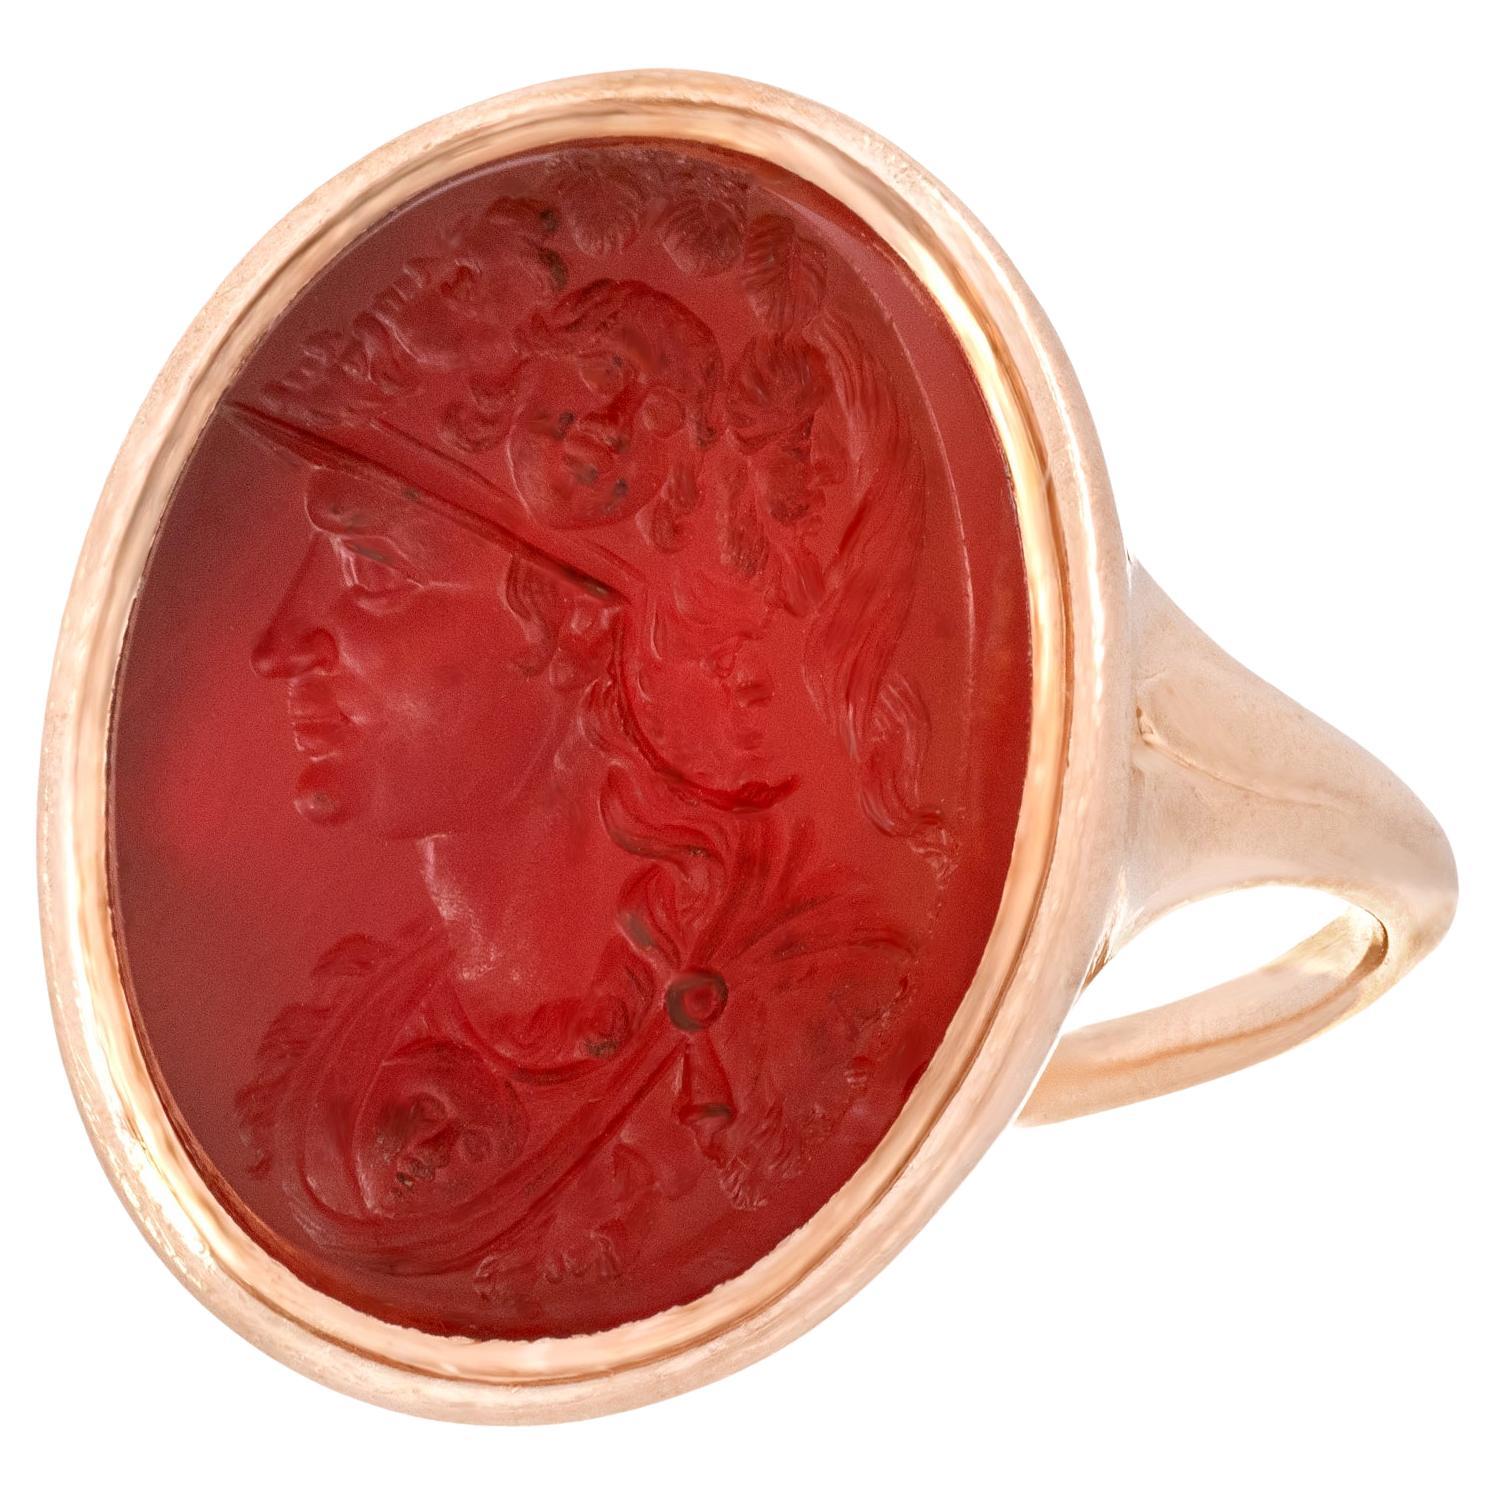 What is intaglio jewelry?